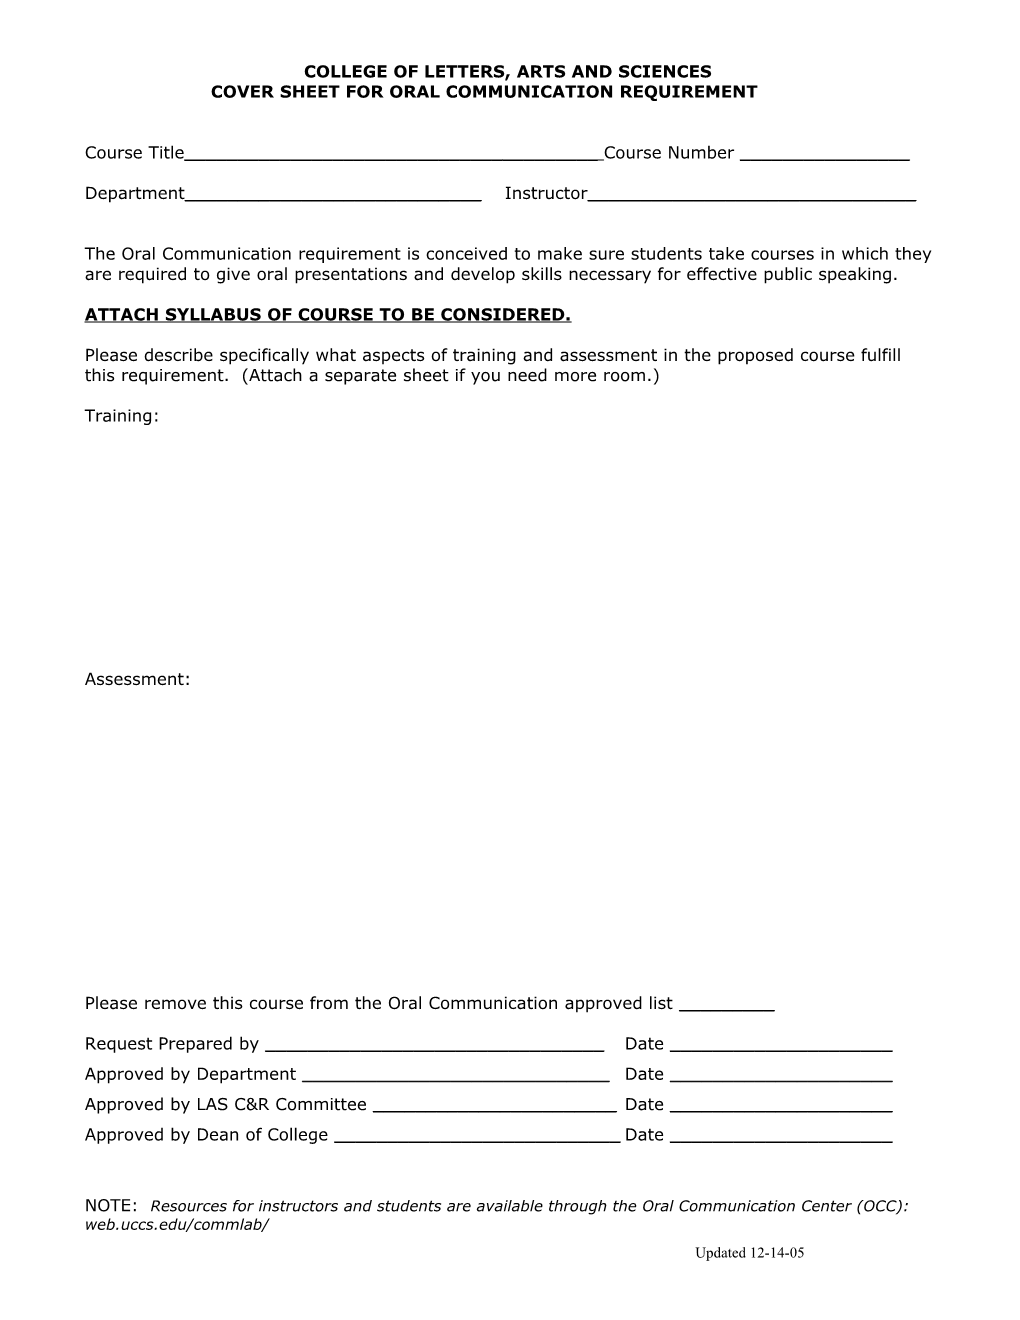 College Of Letters, Arts And Sciences Cover Sheet For Cultural Diversity And Global Awareness Requirements